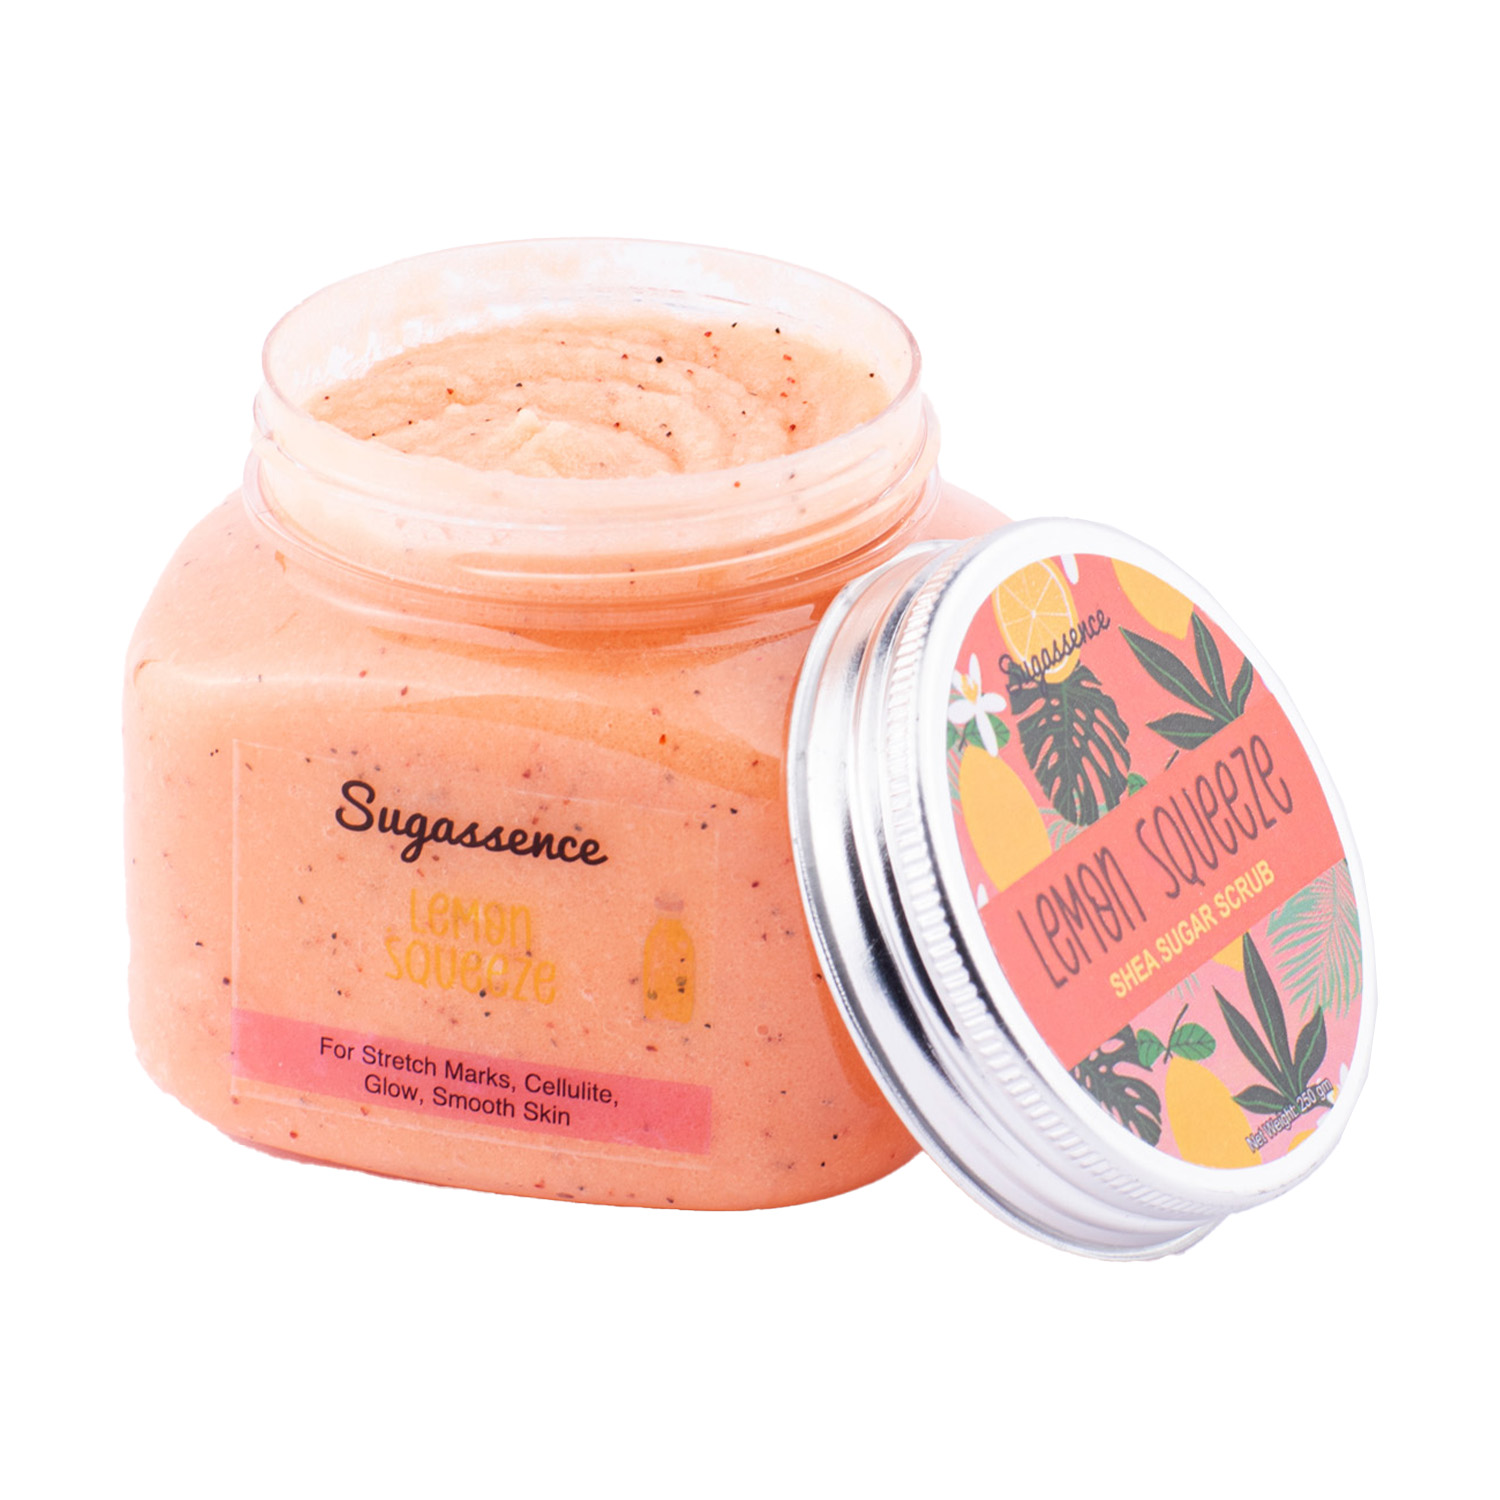 Sugassence Lemon Squeeze - Shea Sugar Scrub - Stretch Marks, Cellulite and Get that Perfect Glow, 100gm